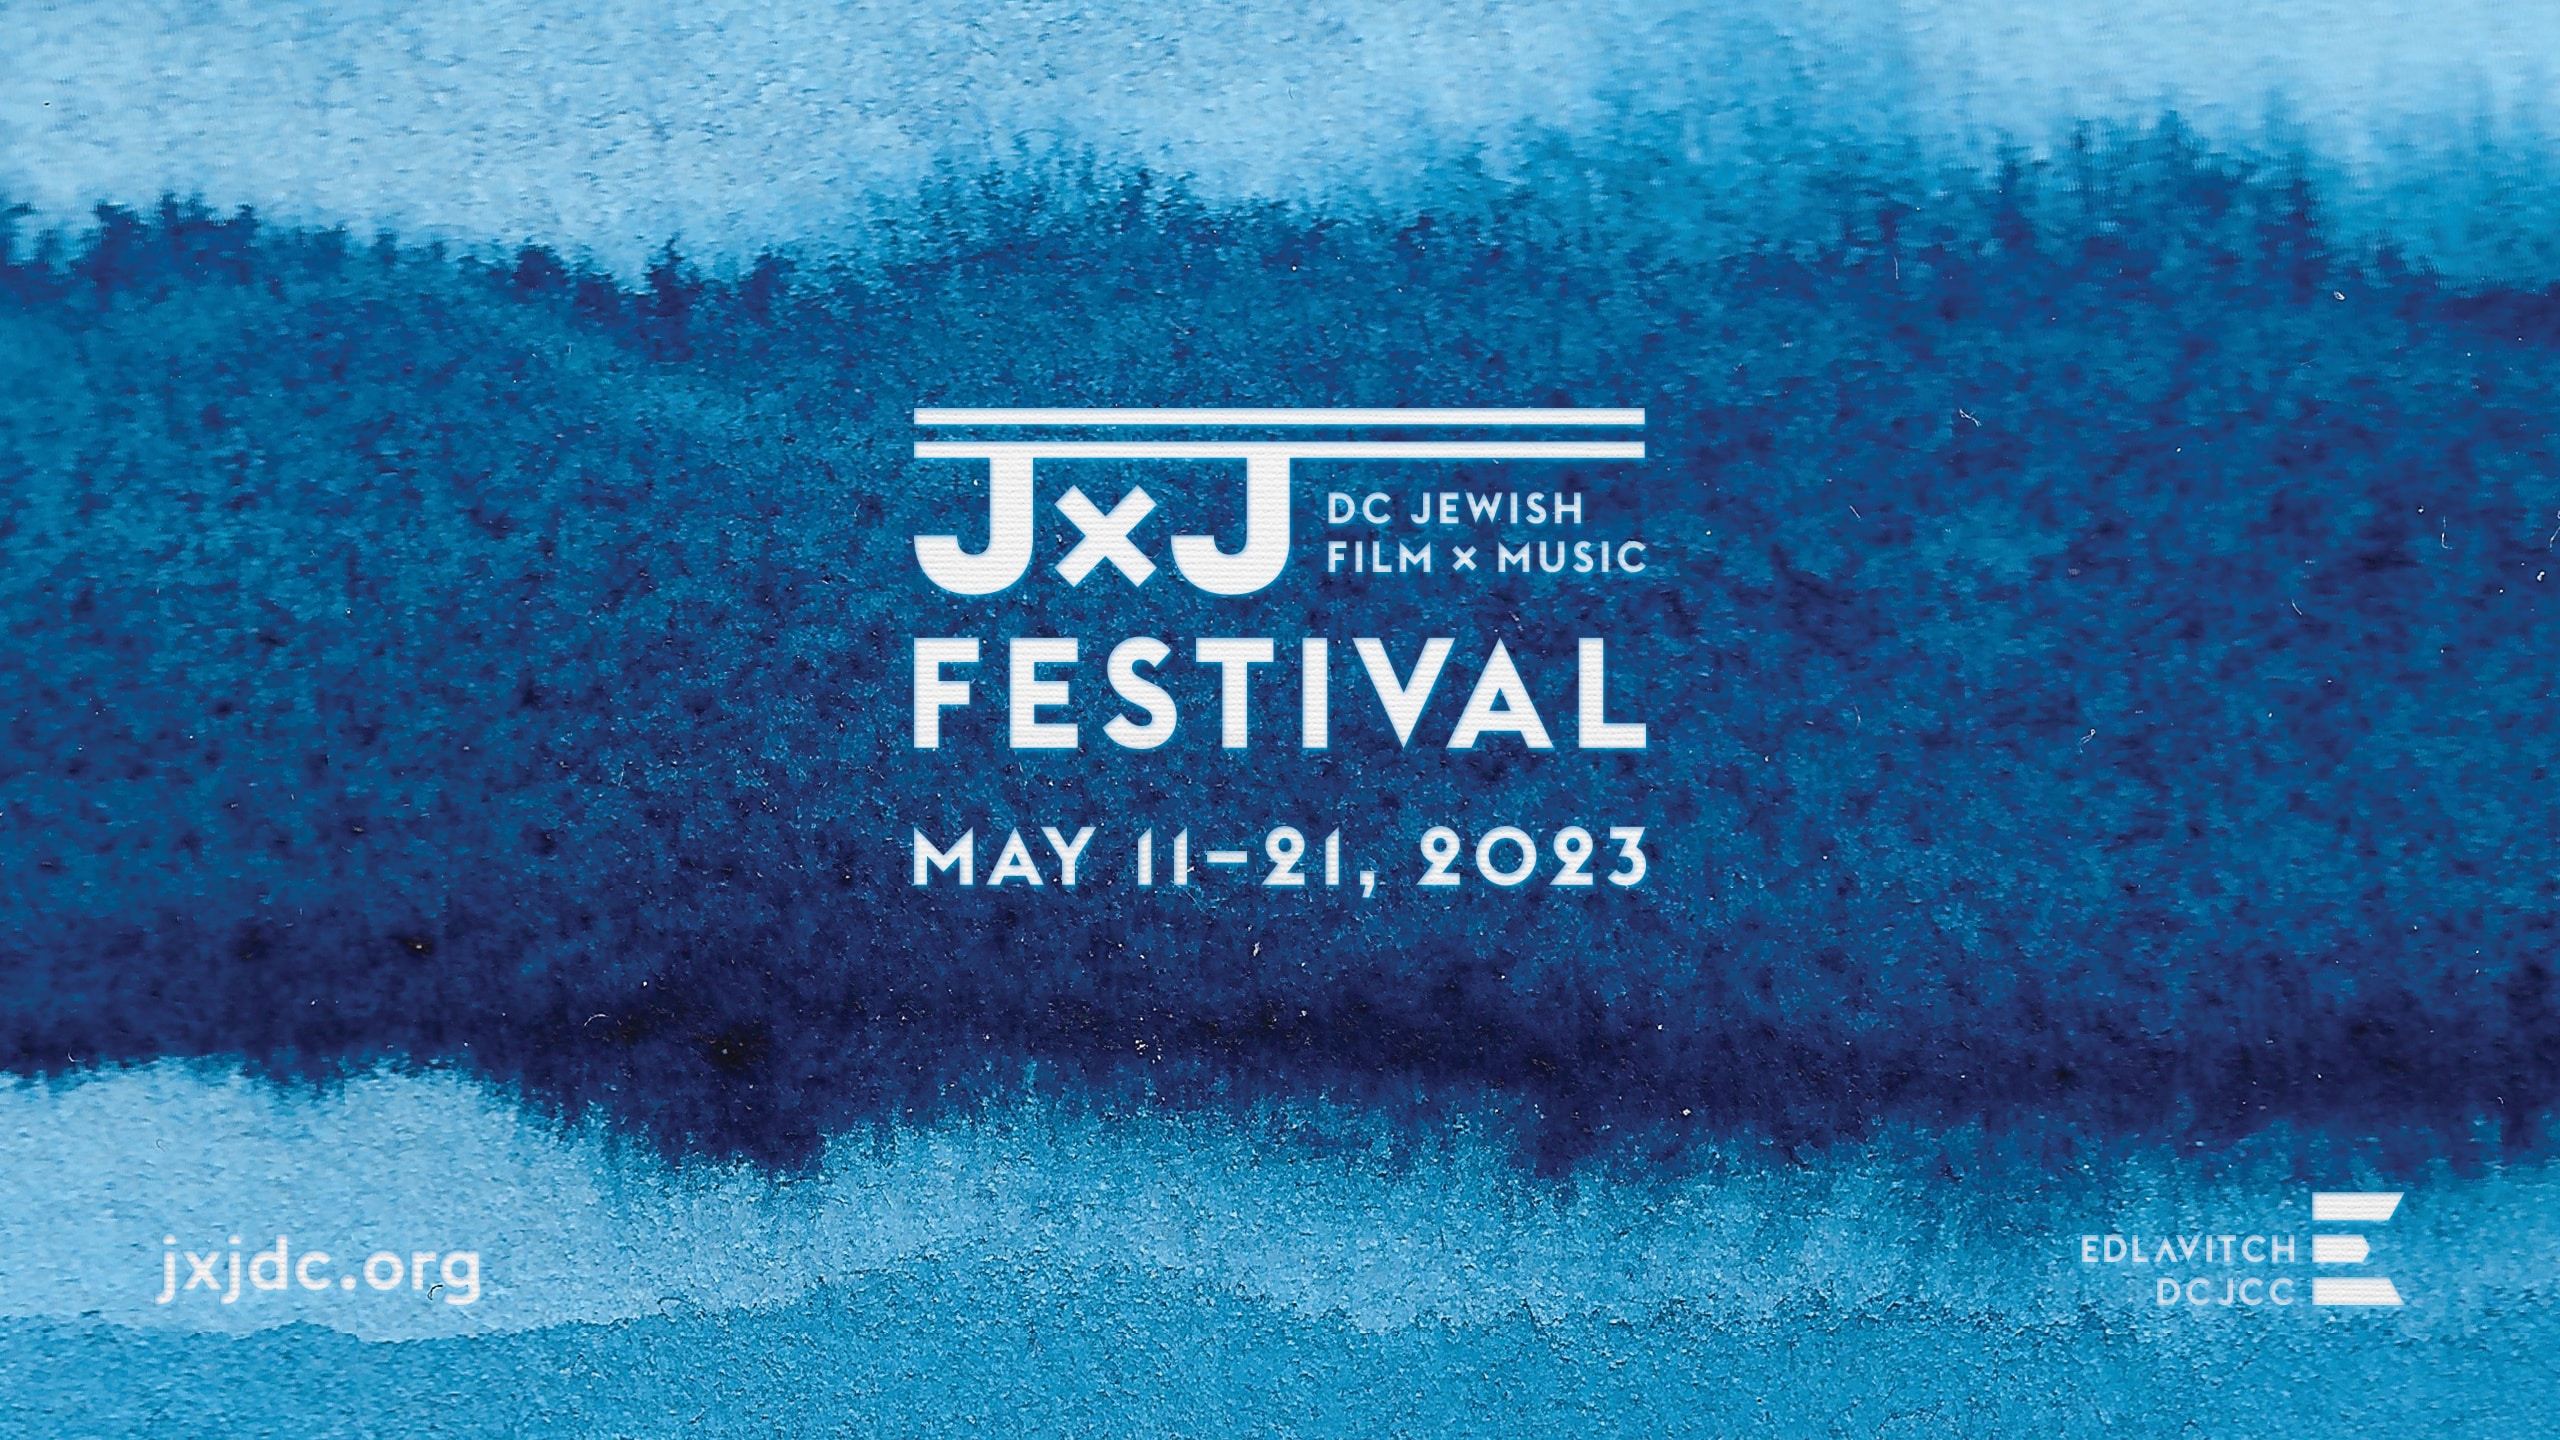 Blue watercolor background. Text: JxJ DC Jewish Film and Music Festival; May 11-21, 2023